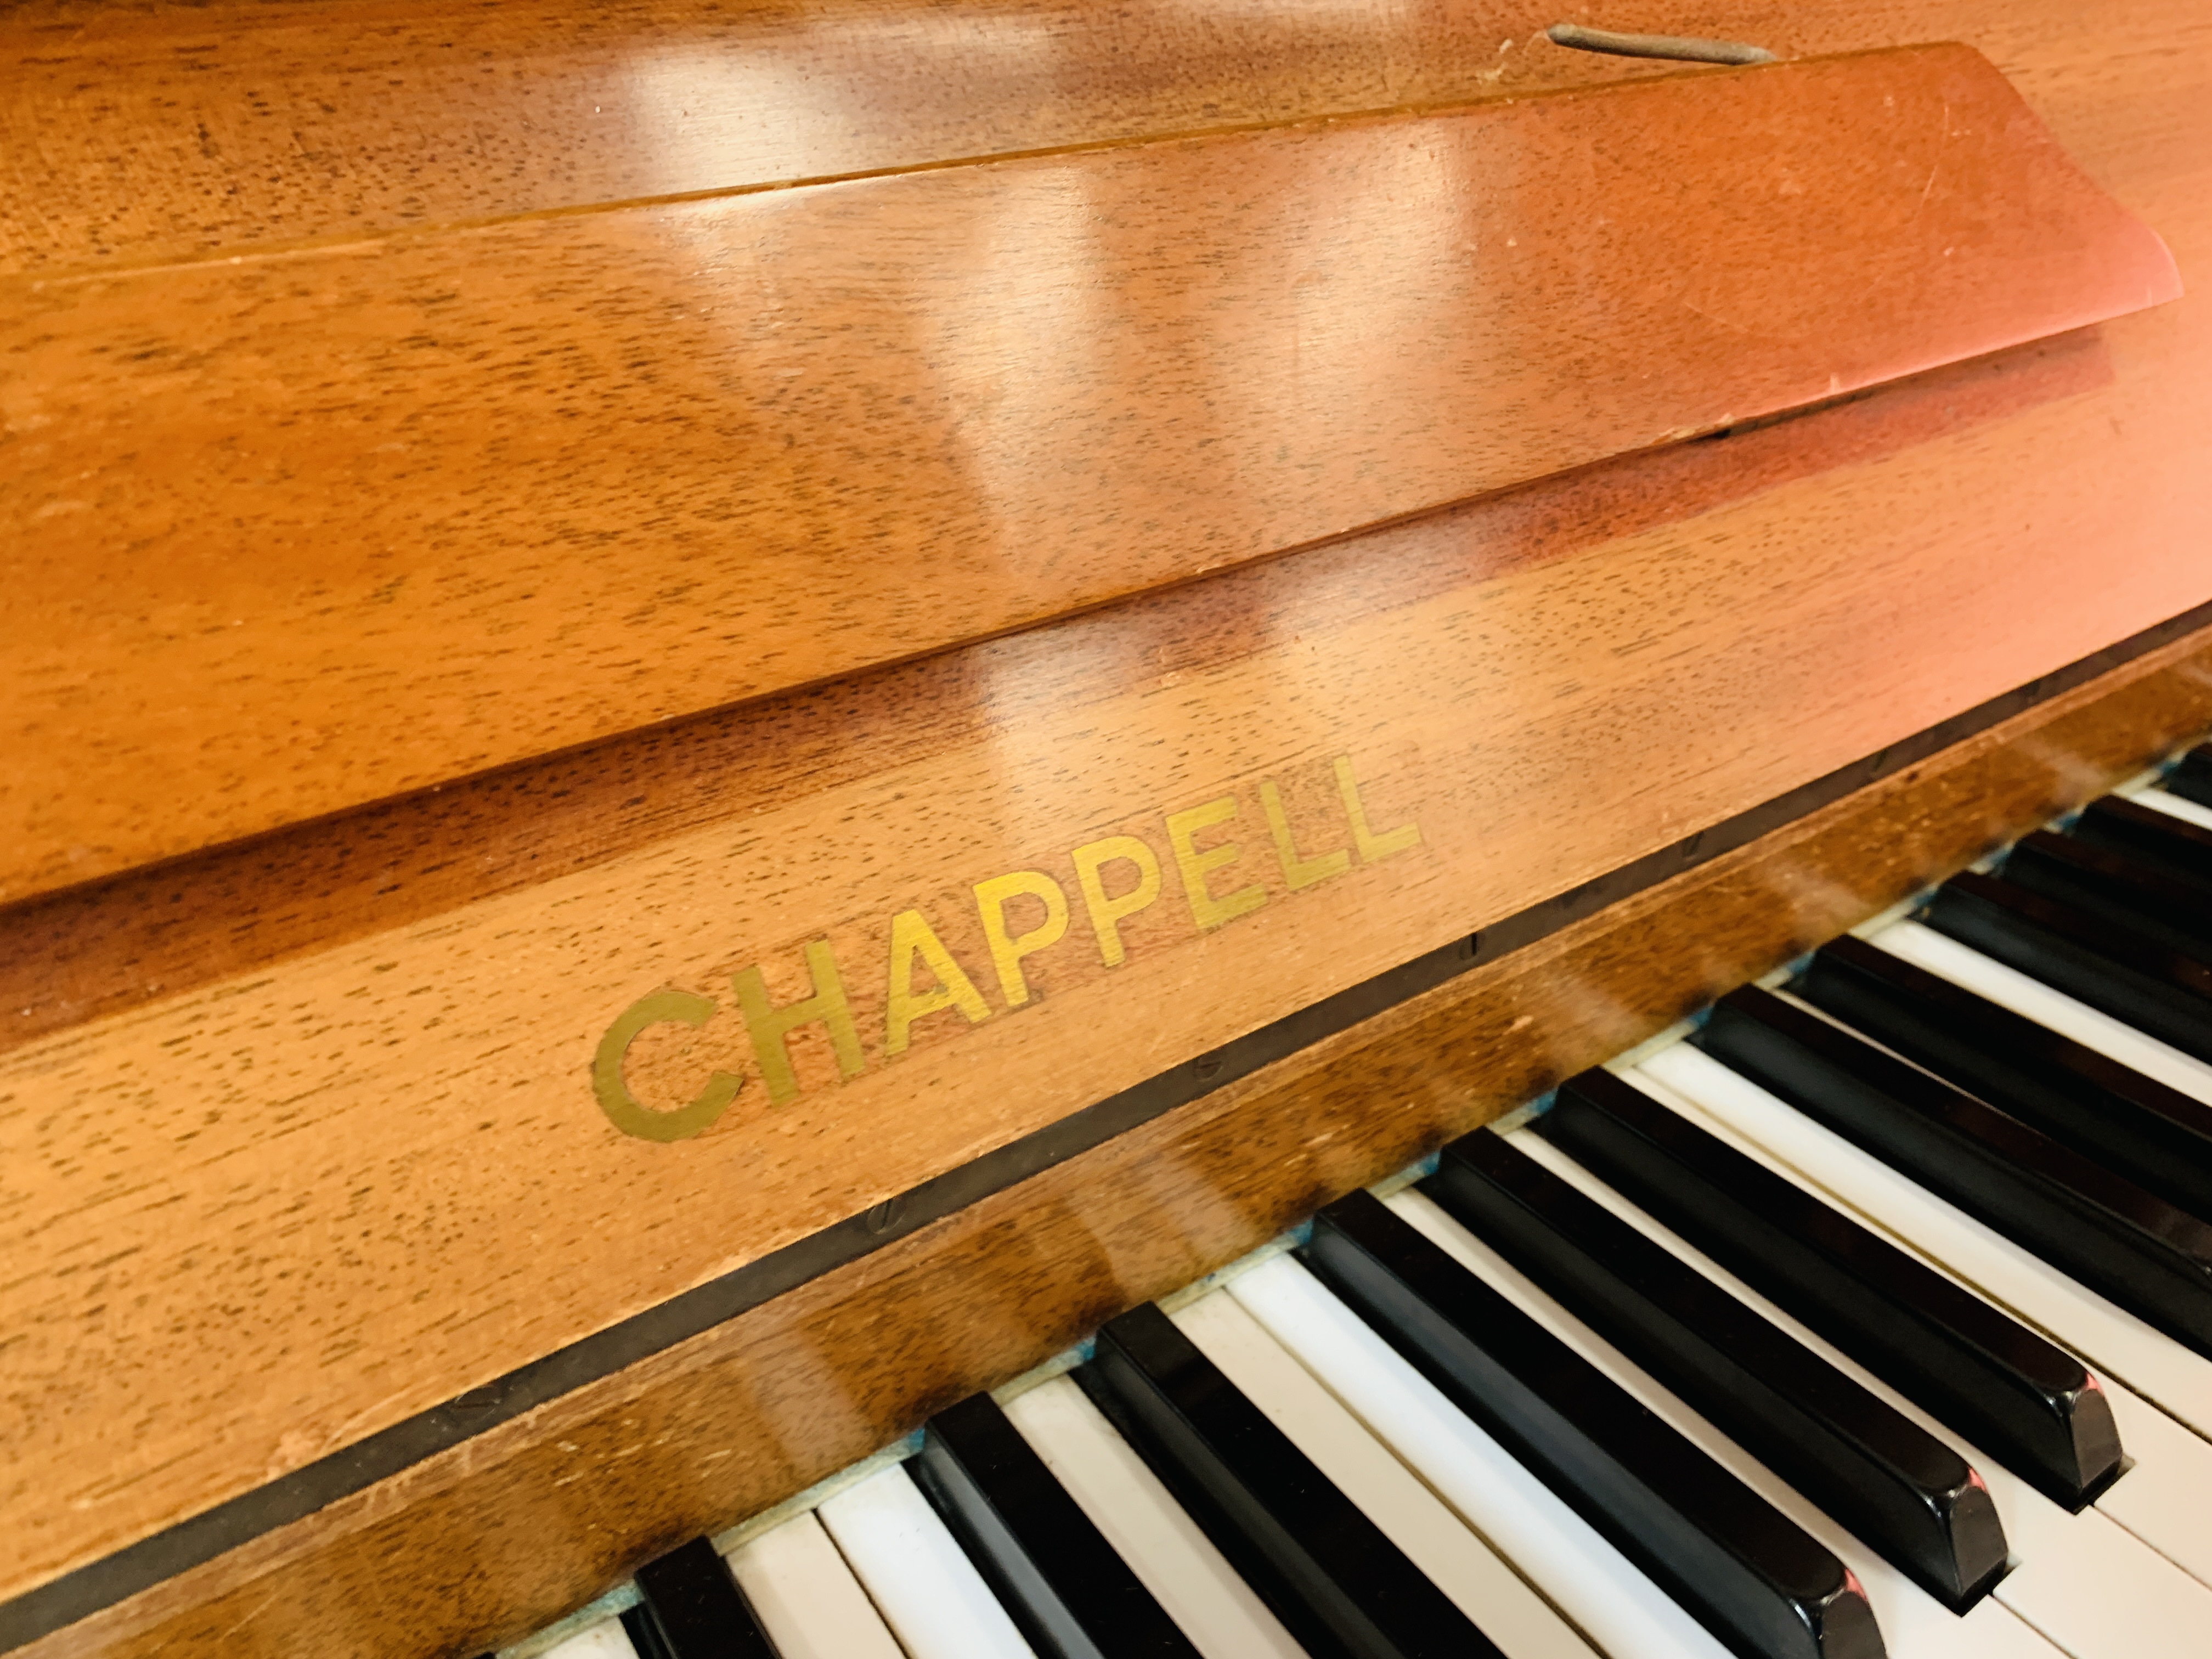 A CHAPPELL UPRIGHT OVERSTRUNG PIANO - Image 8 of 16